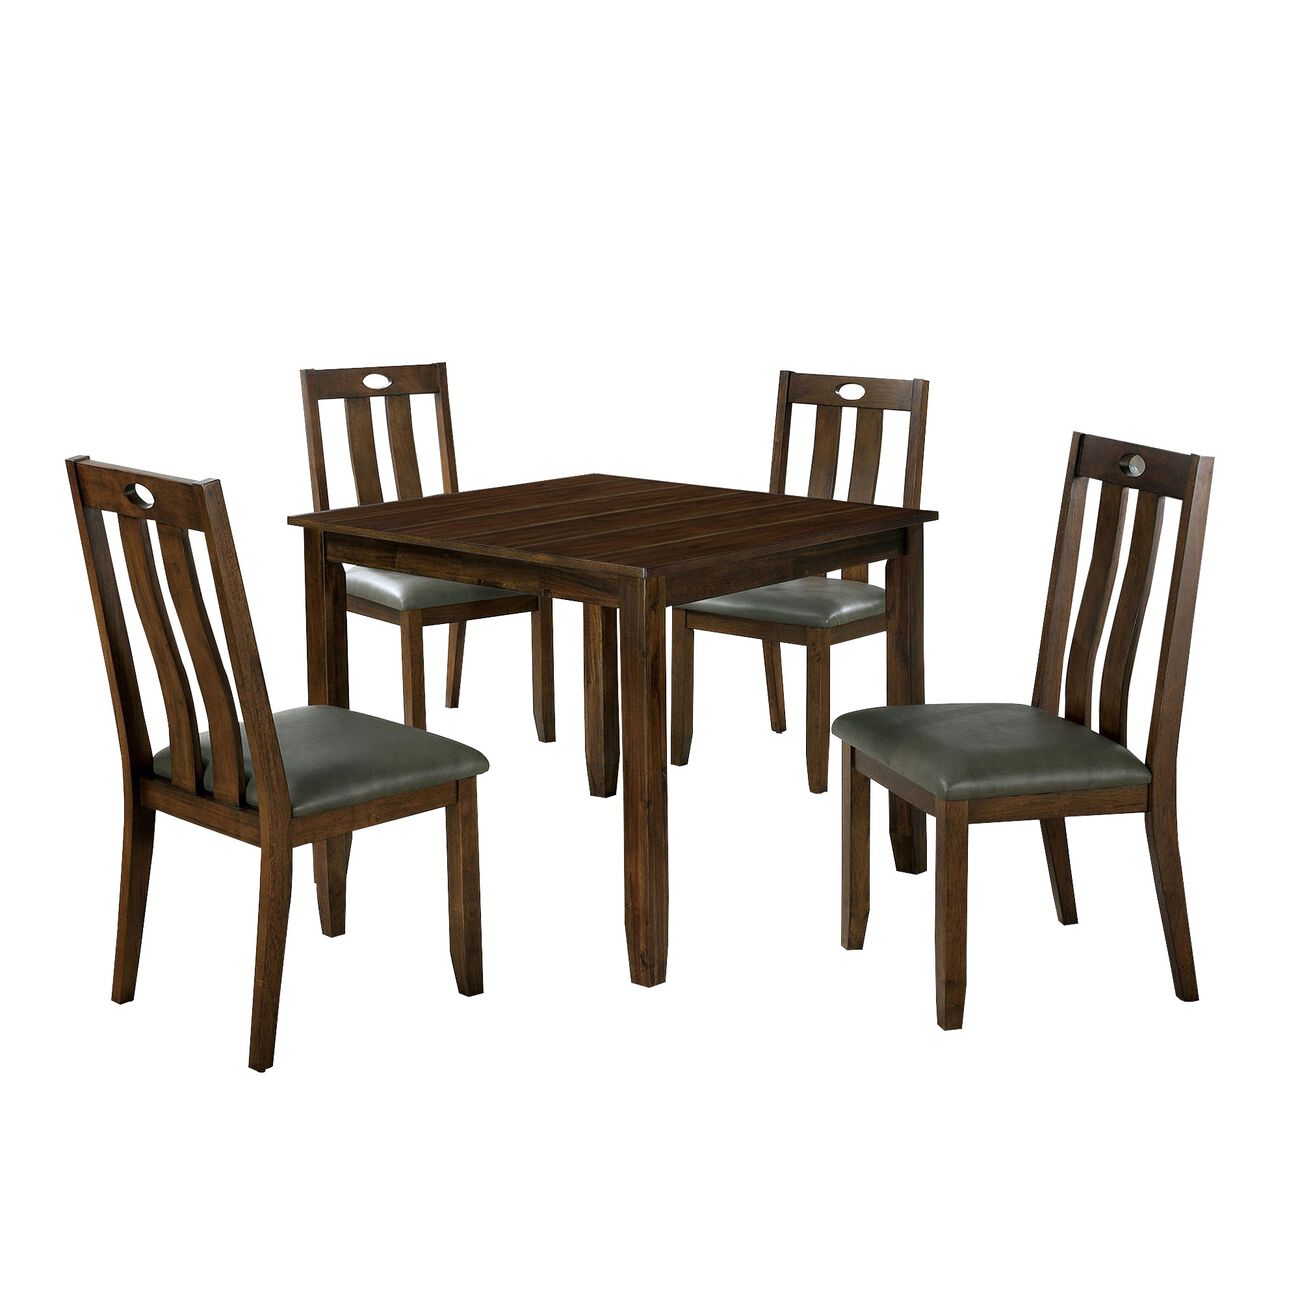 5 Piece Wooden Dining Set with Square Table, Brown